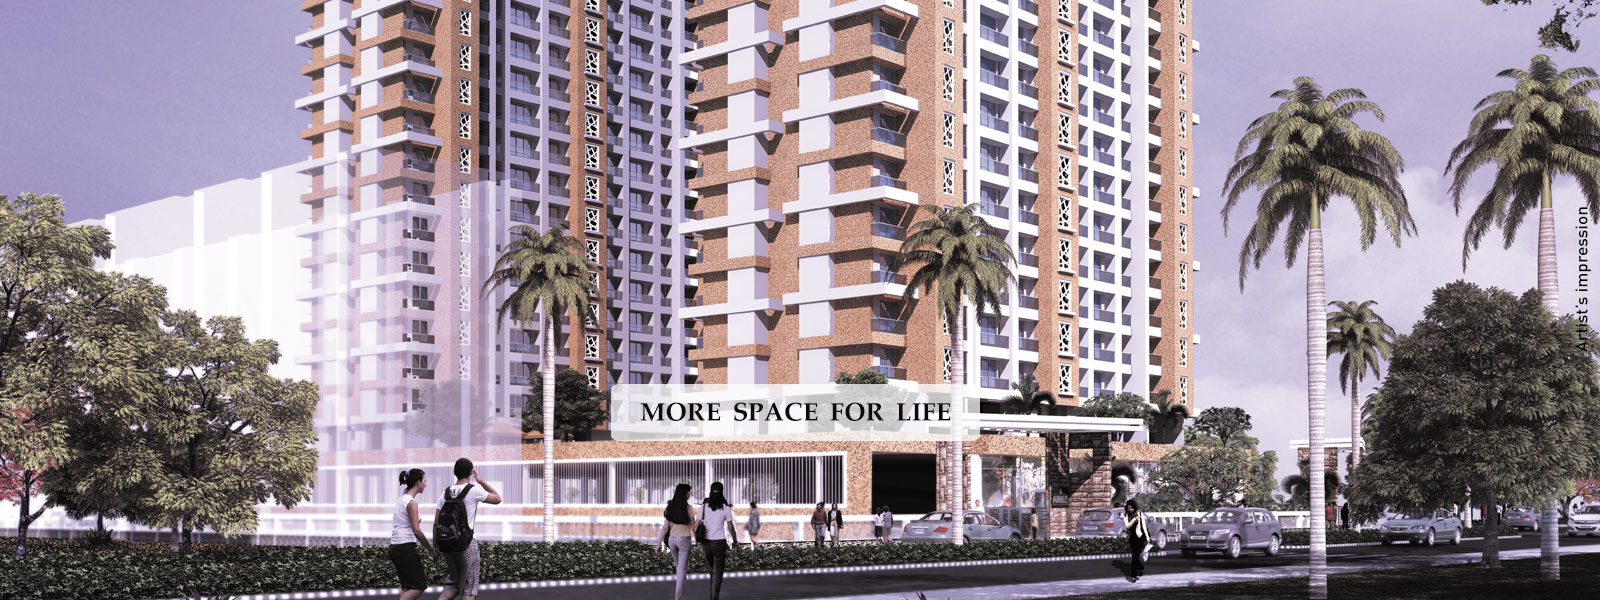 Flats in Thane - Auralis - The Twins - Edelweiss Home Search